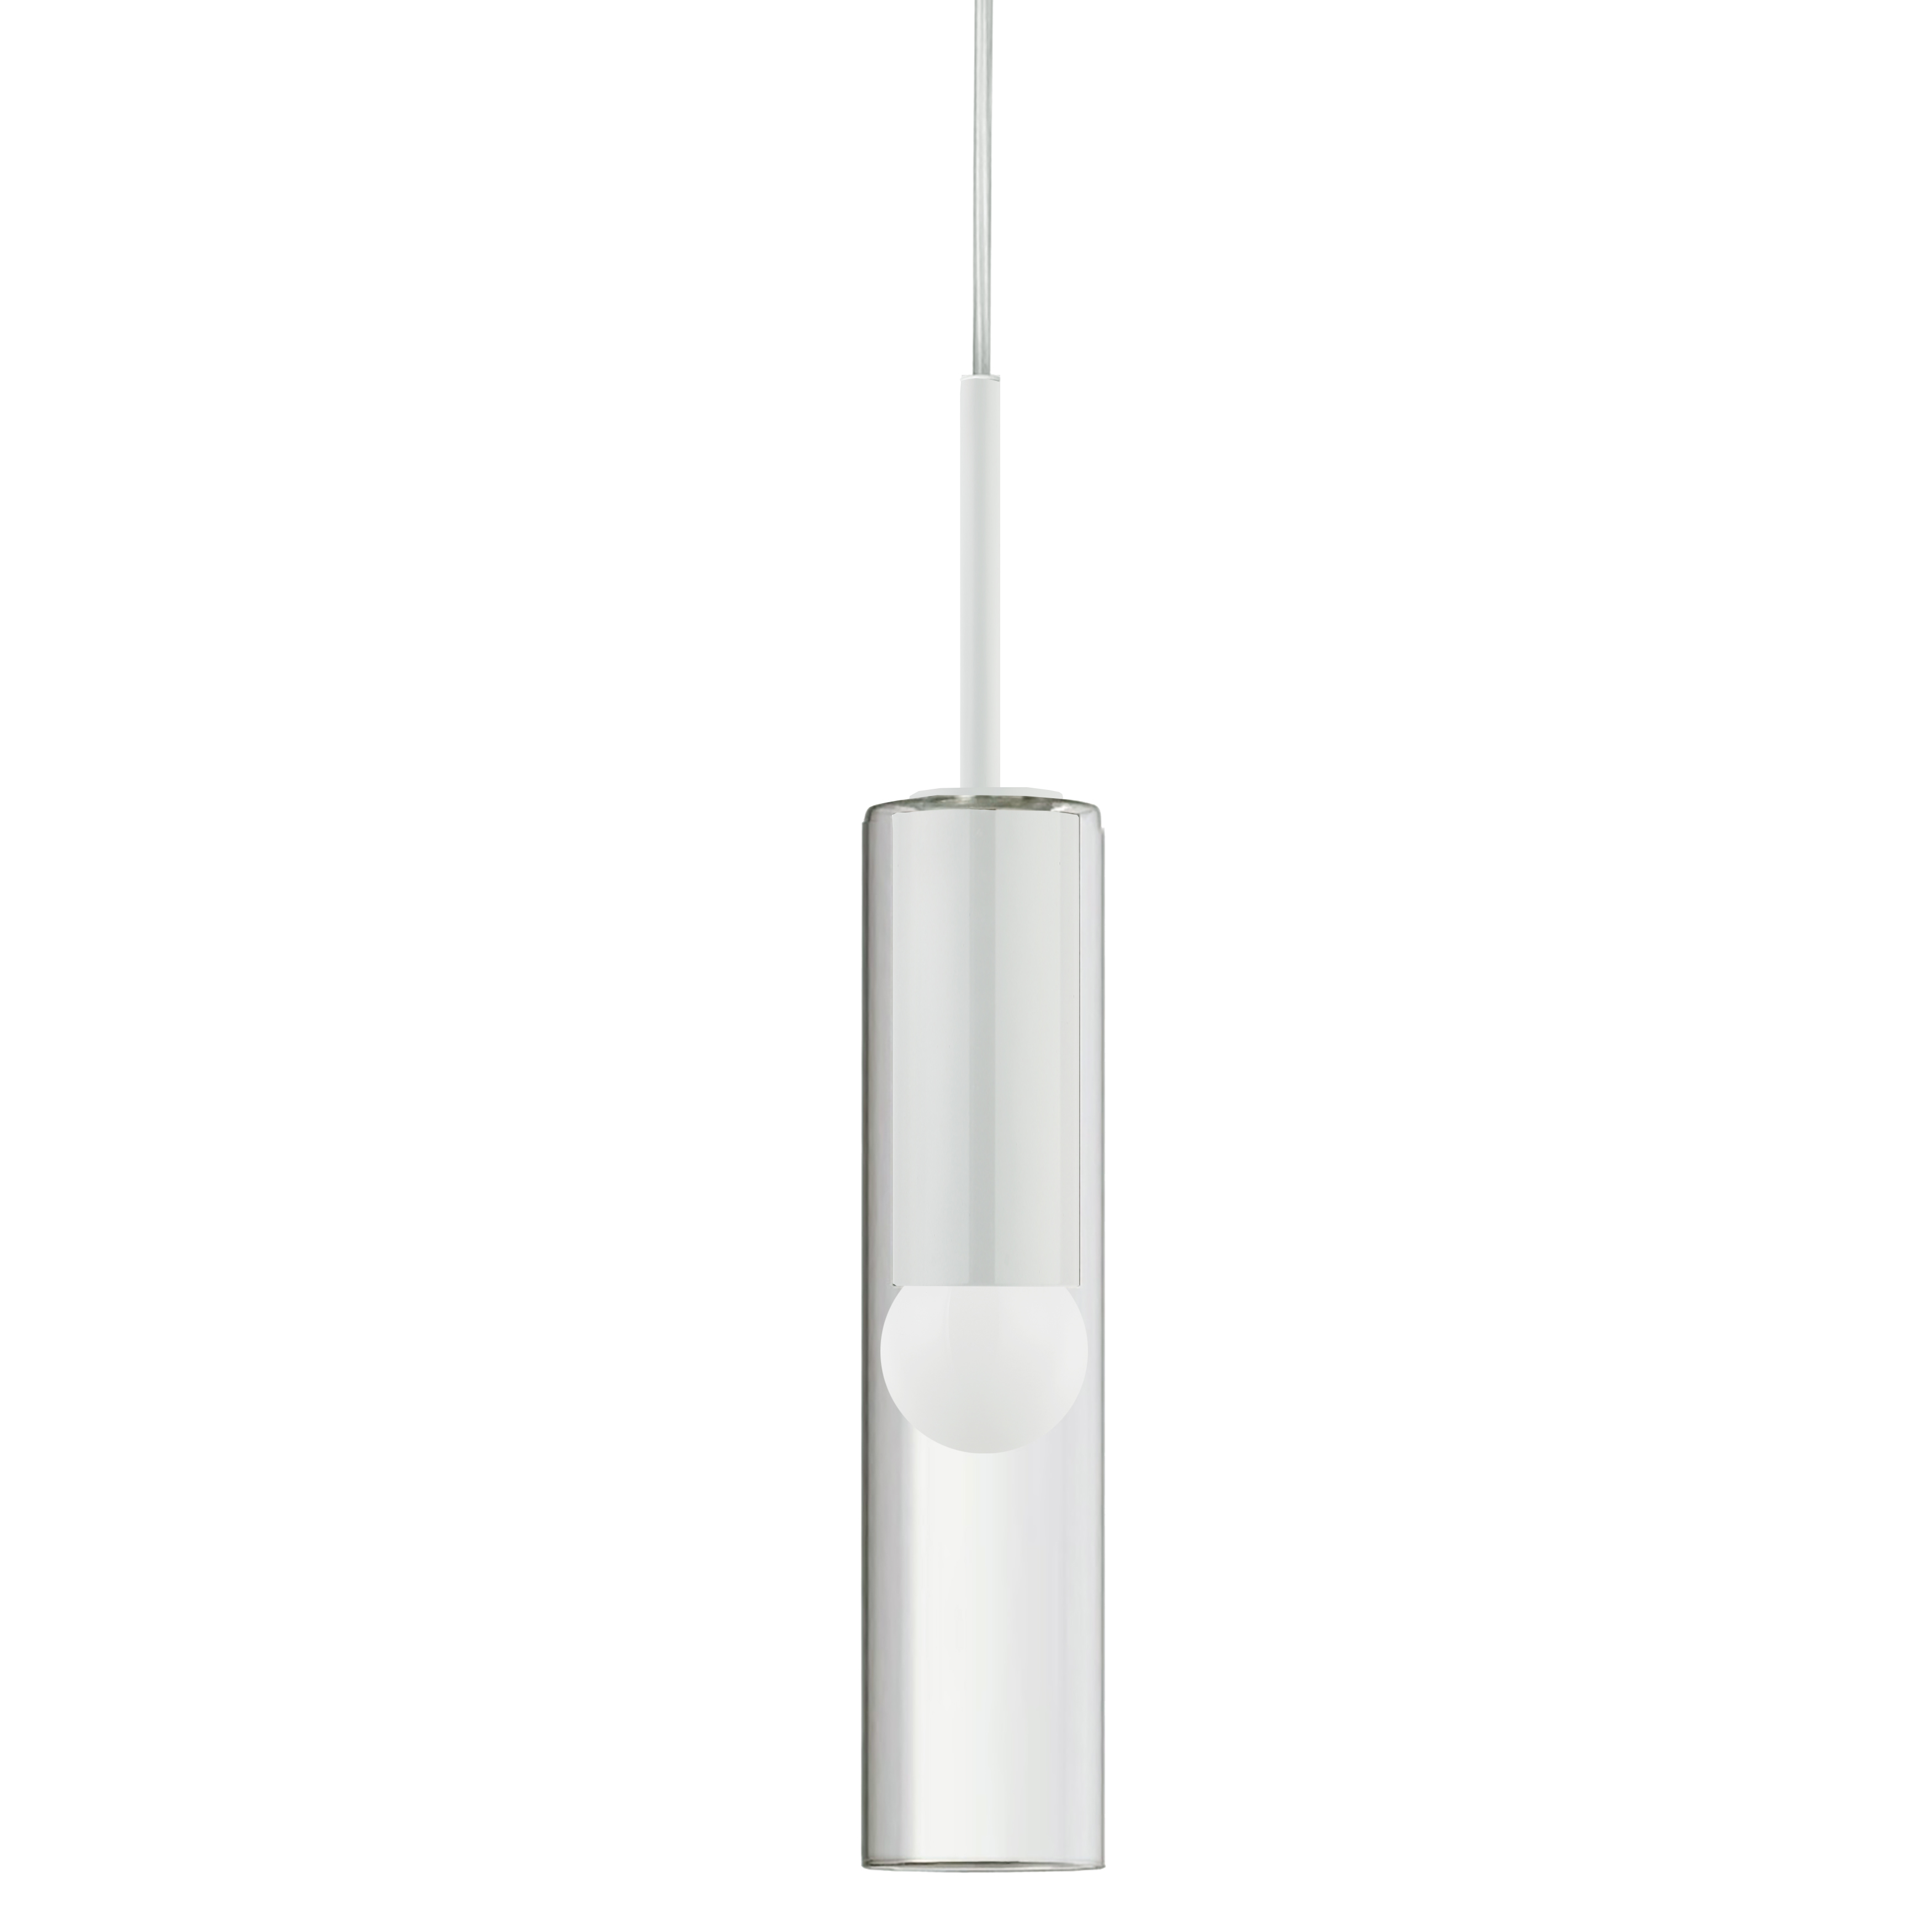 In a sophisticated mode, the Palmer family of lighting draws attention within a modest footprint that will fit in any size room. The elegant drop design spotlights the subtleties of geometric detail. The metal frame is contained within a clear glass cylindrical housing in a beautifully smooth and seamless construction. It's a look that makes a statement without shouting over everything else in the room. Modern Palmer lighting will add a note of sophistication to kitchens, hallways and dinettes or bar areas.